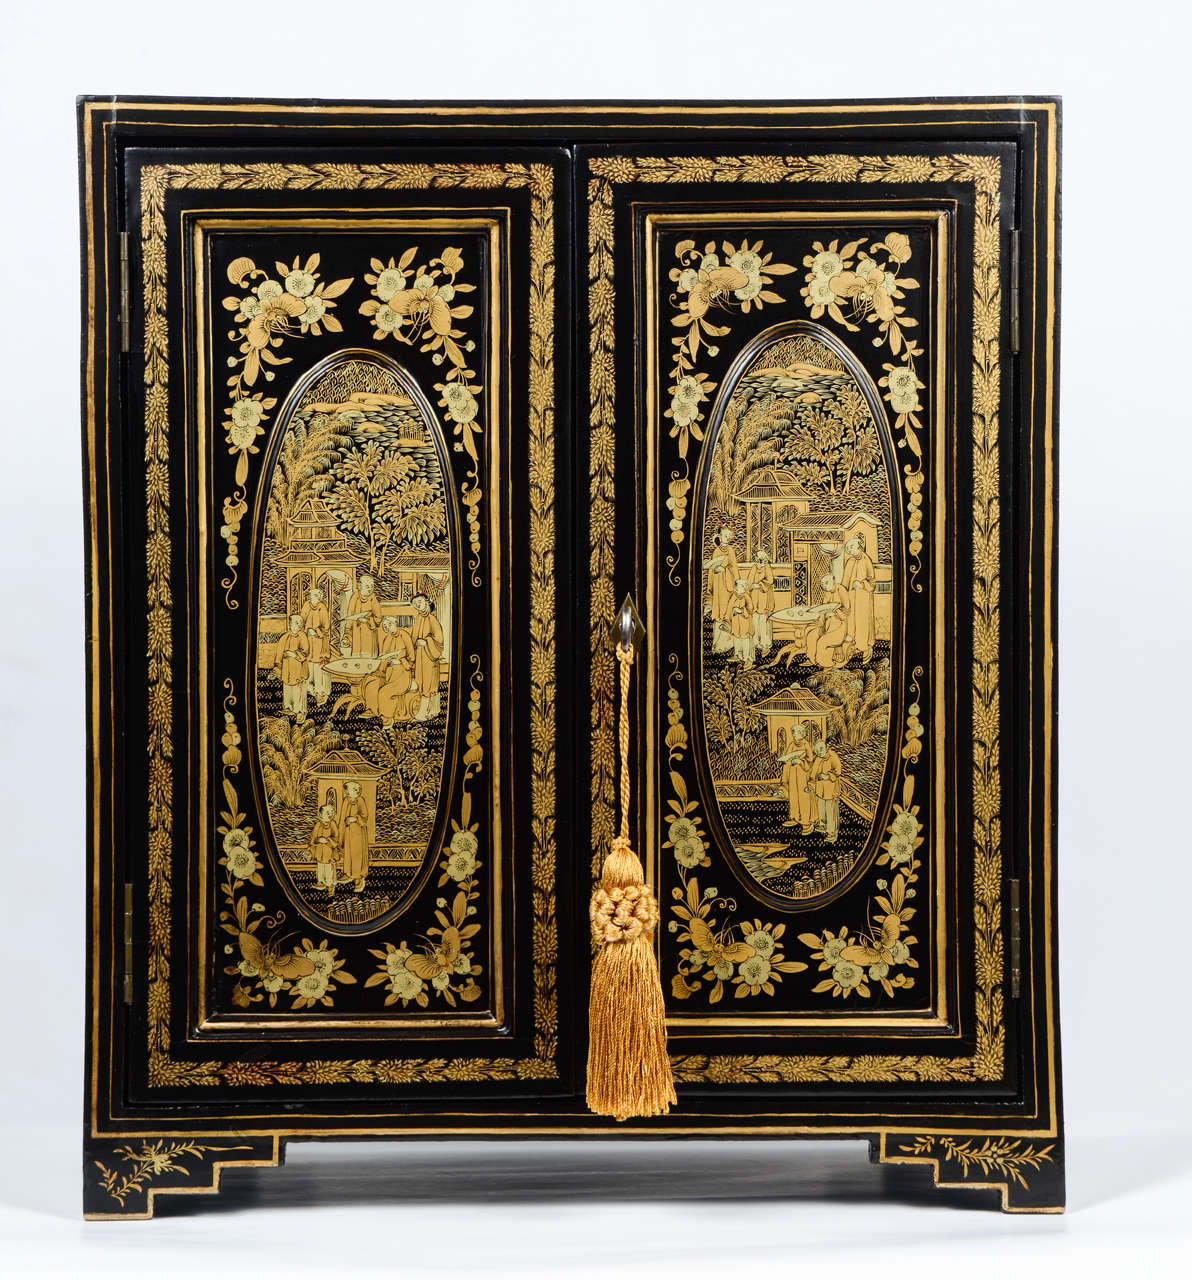 Cabinet painted in gold lacquer on a black lacquer background. The decor consists of reserves containing lively scenes of characters in gardens decorated with pavilions.
The bottom decorated with flowers and foliage. The interior with five drawers